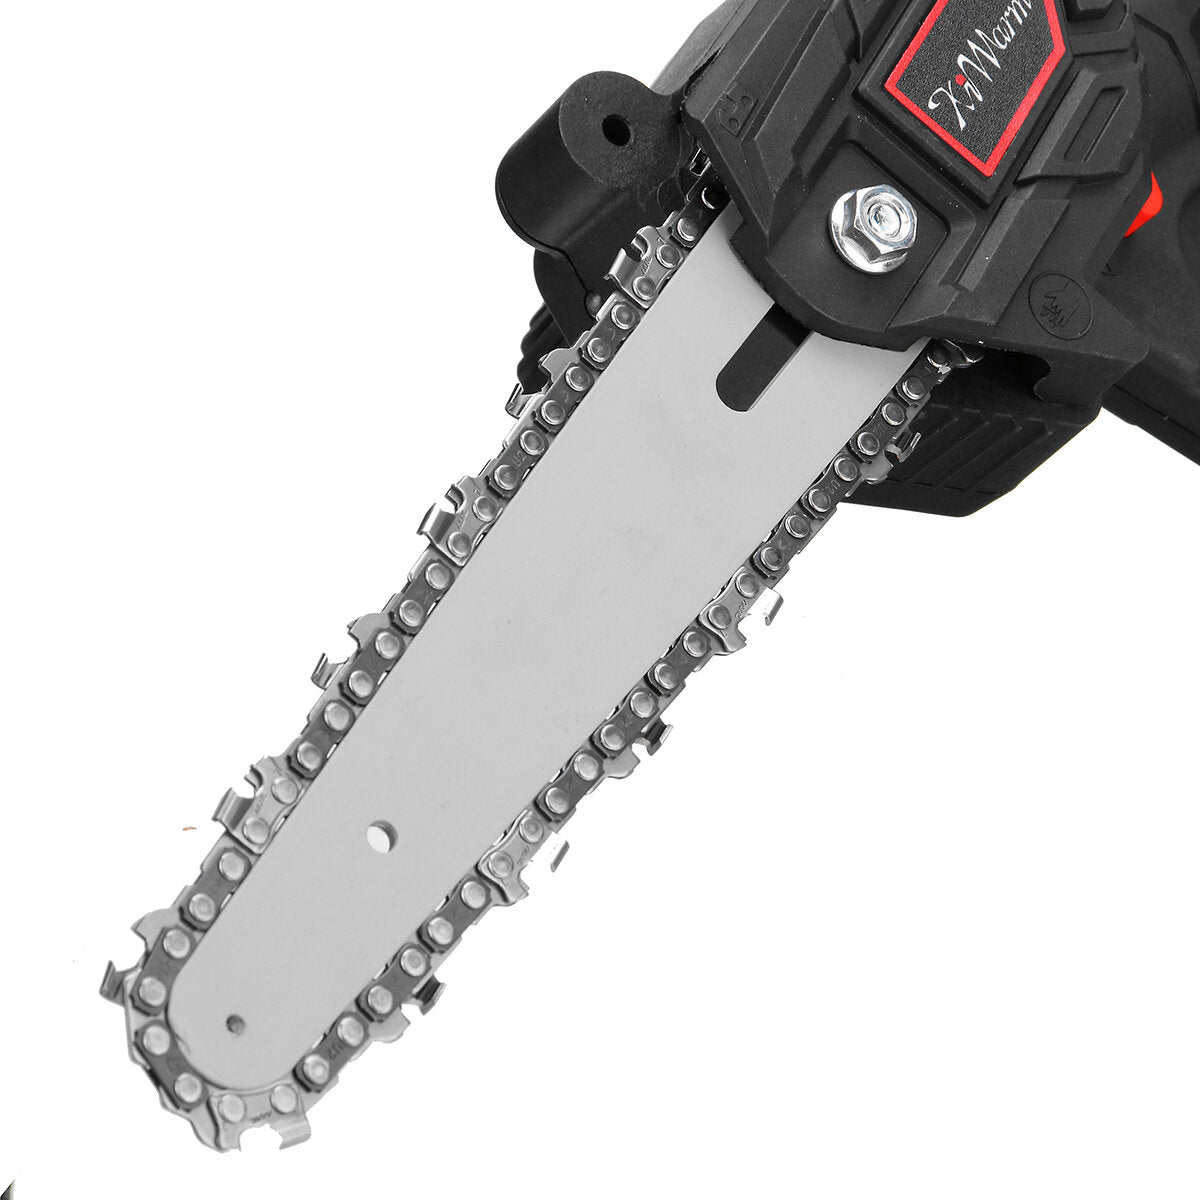 6 Inch Portable Electric Pruning Chain Saw Rechargeable Small Woodworking Wood Cutter